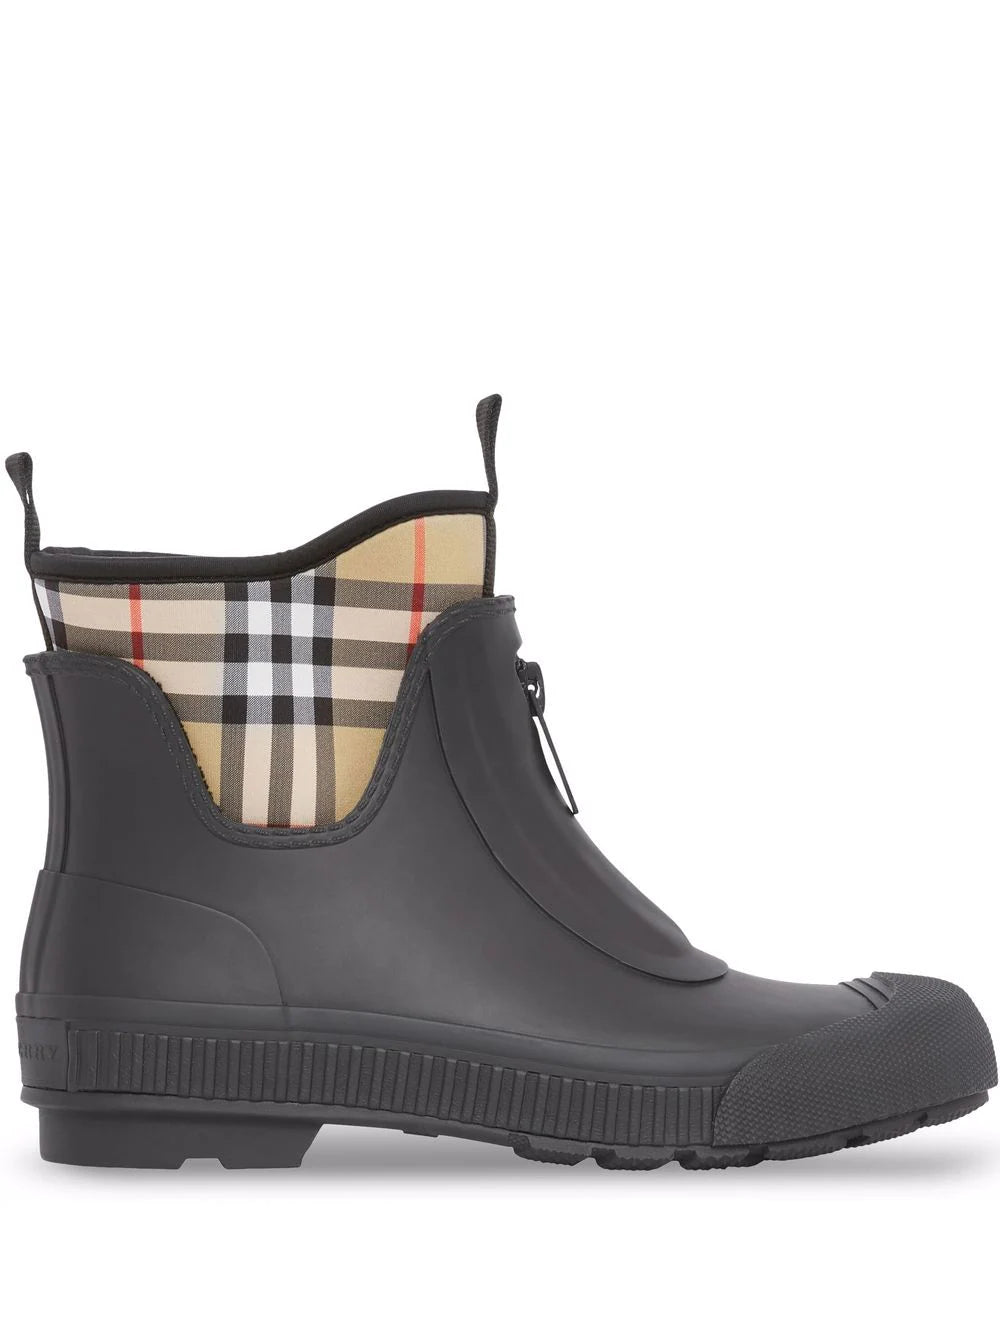 A Legacy Continued: Thomas Burberry Boots